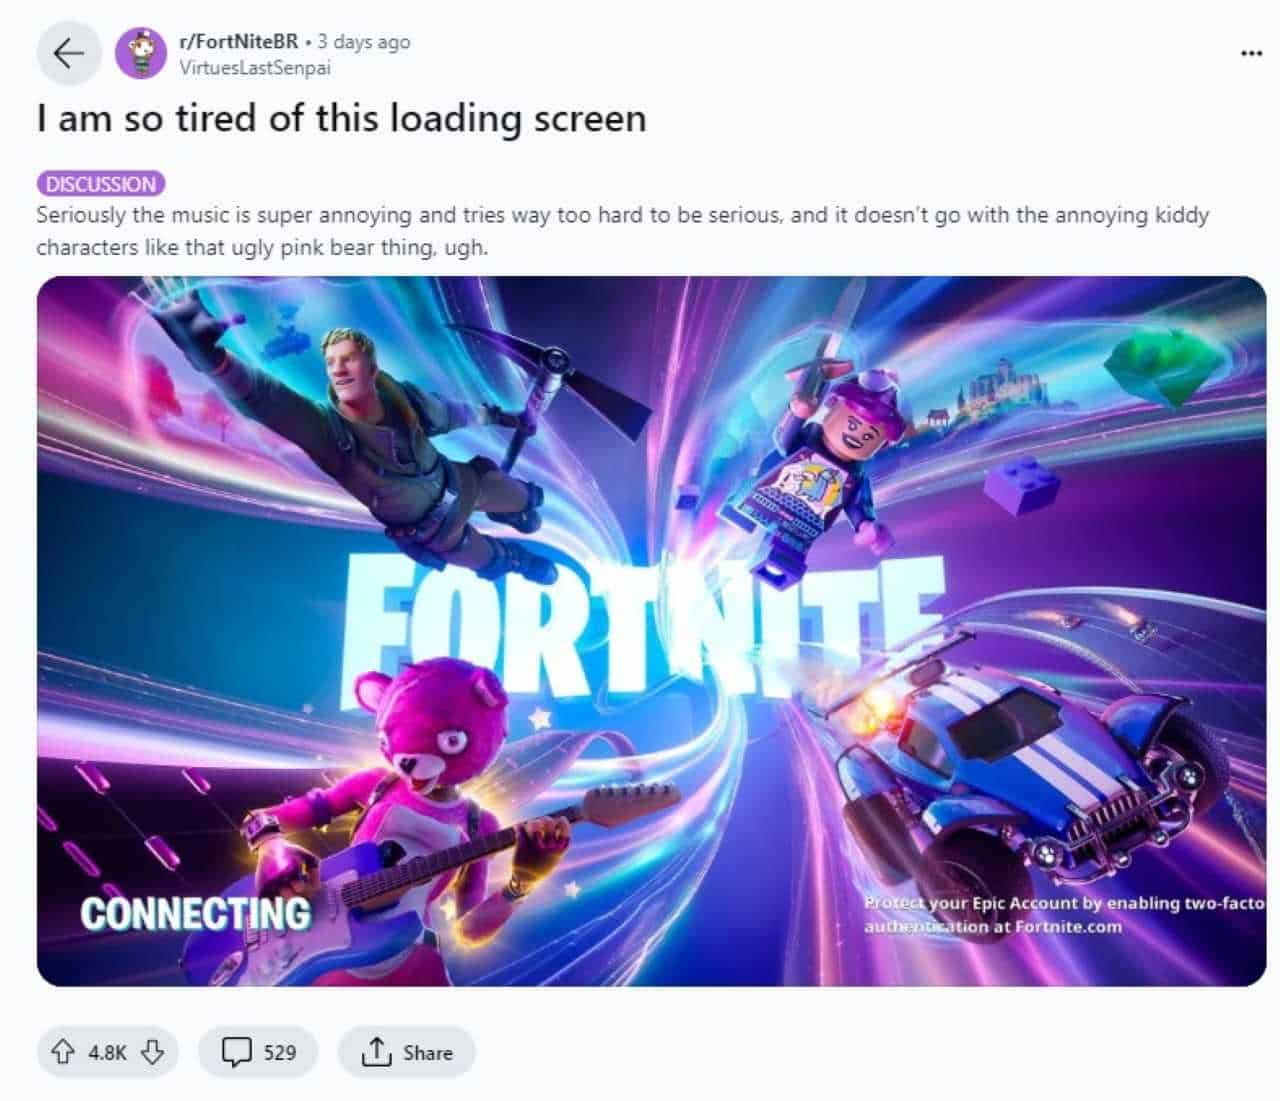 Screenshot of a Fortnite game loading screen featuring dynamic character poses and vibrant colors, with a user expressing their weariness of the screen on a social platform. Fortnite players have the weirdest complaint